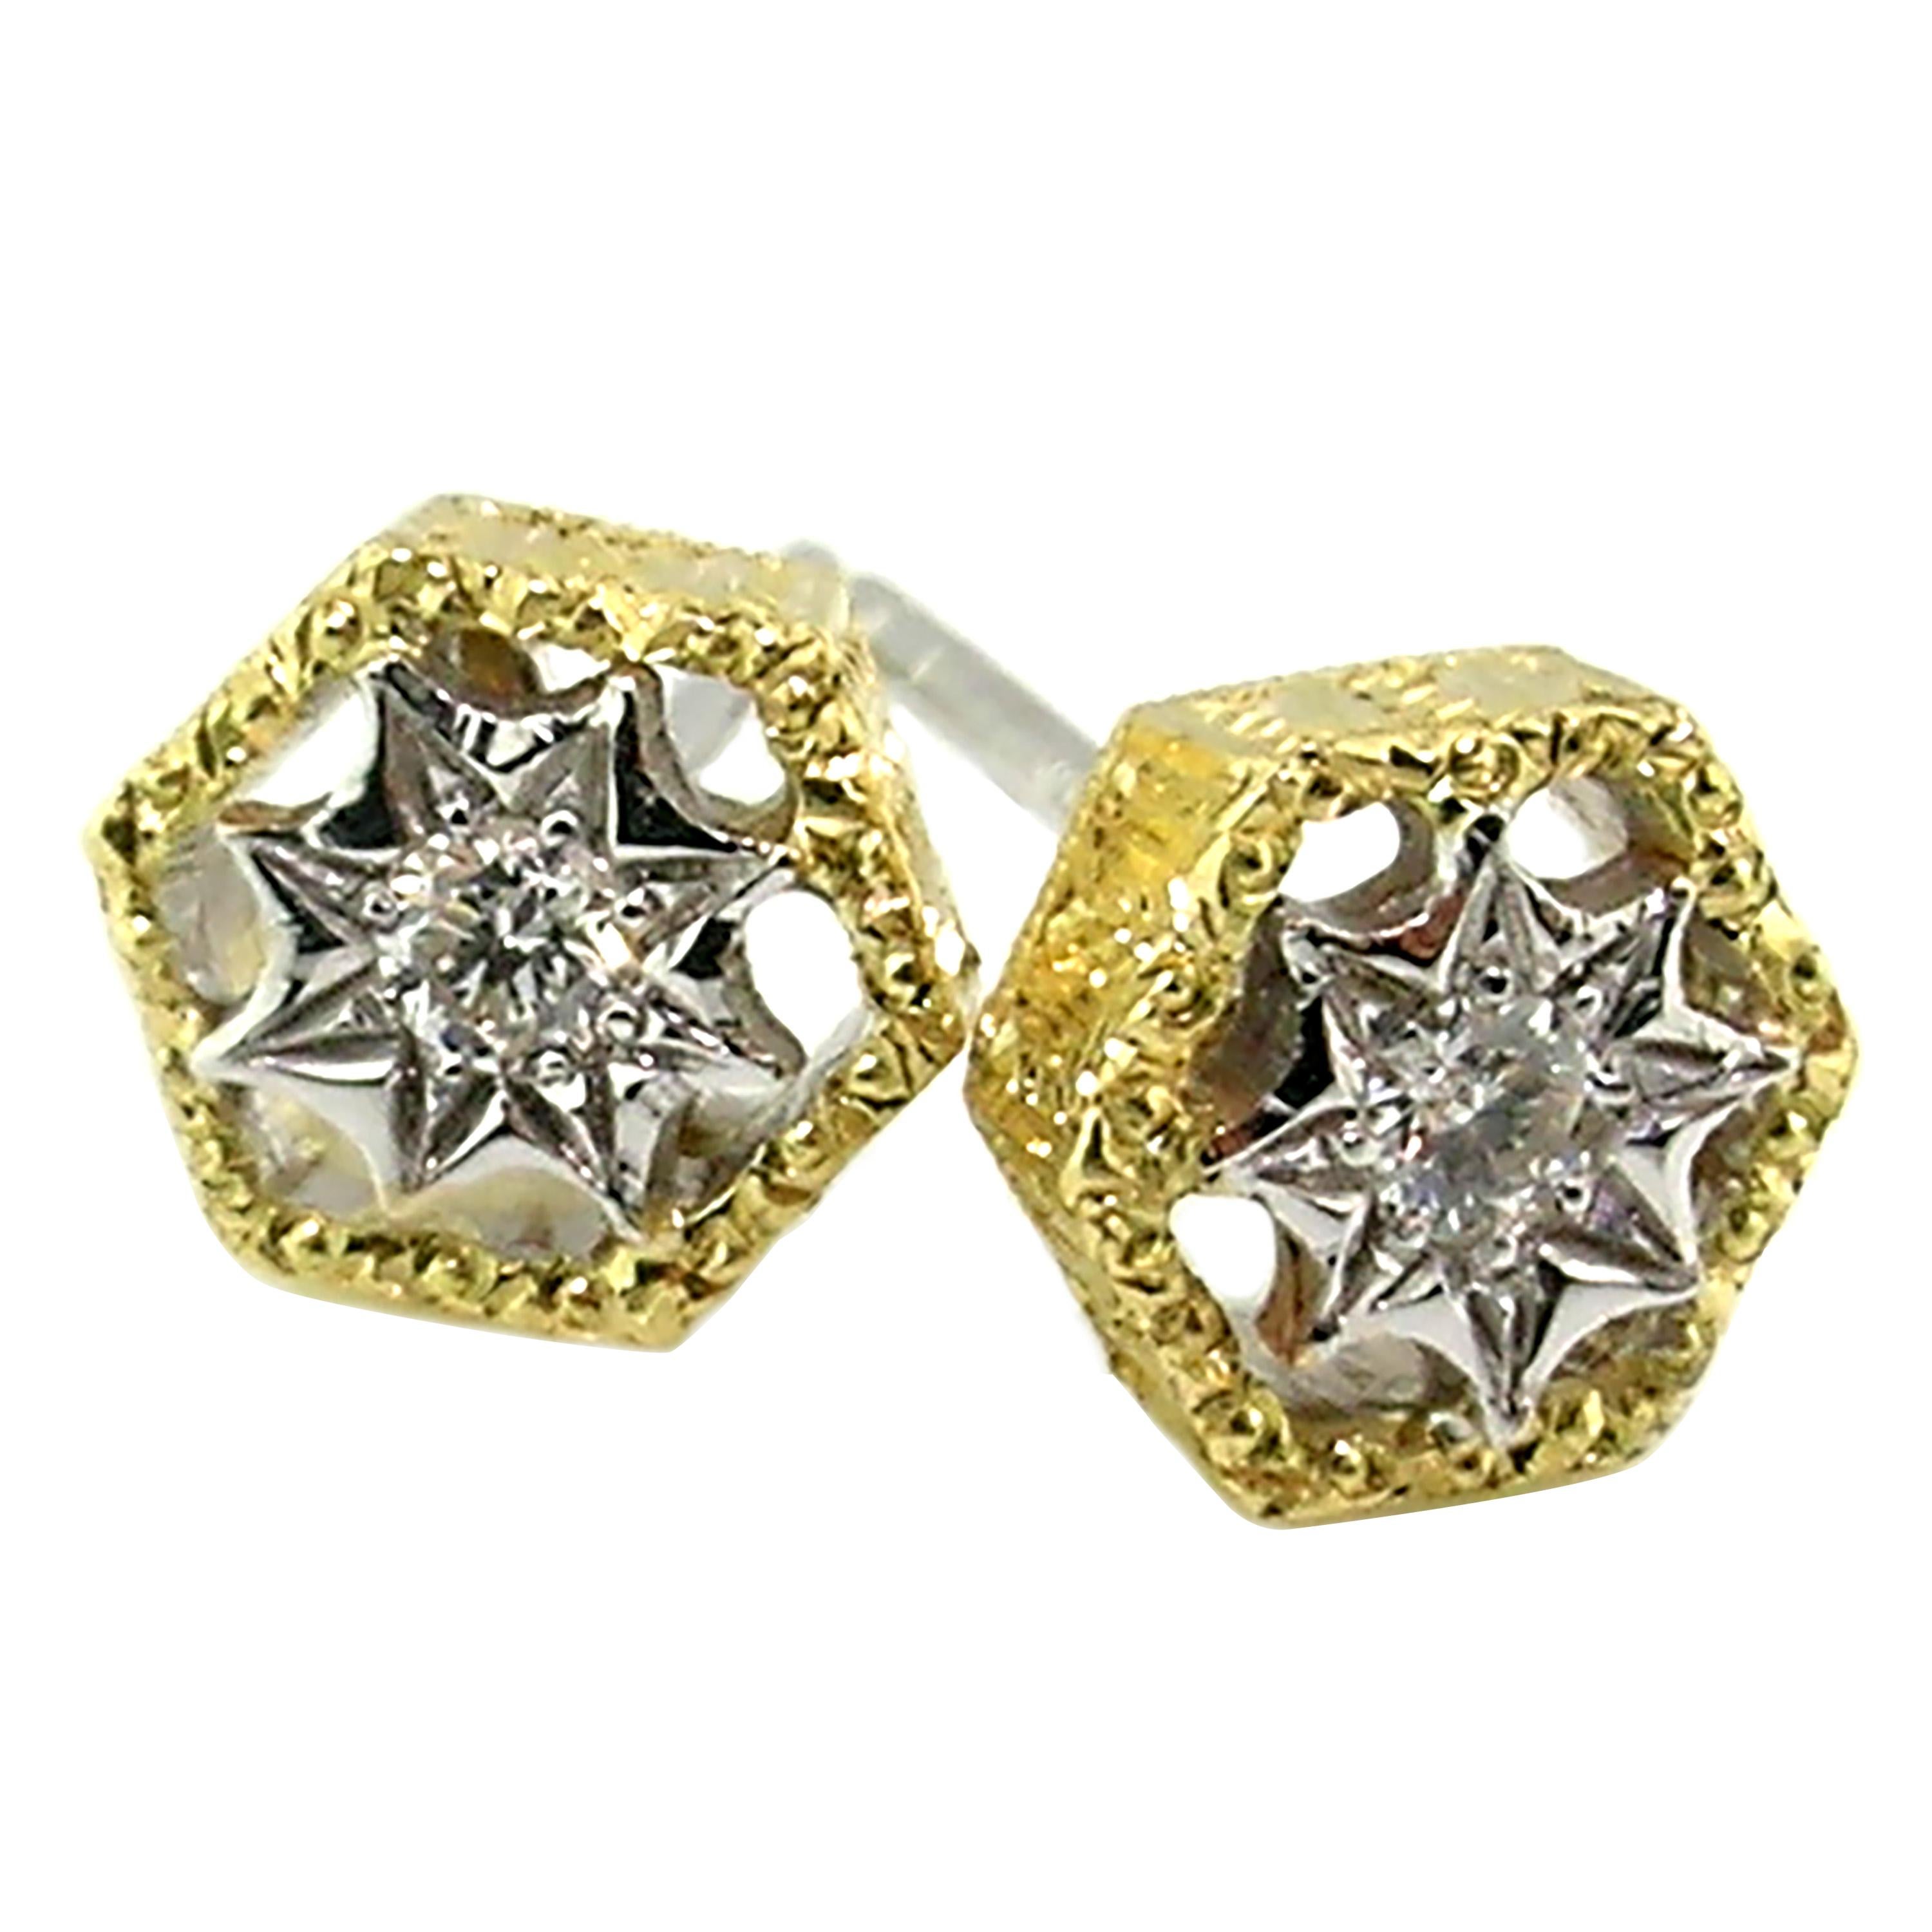 Diamond and 18kt Engraved Honeycomb Stud Earrings, Handmade in Italy